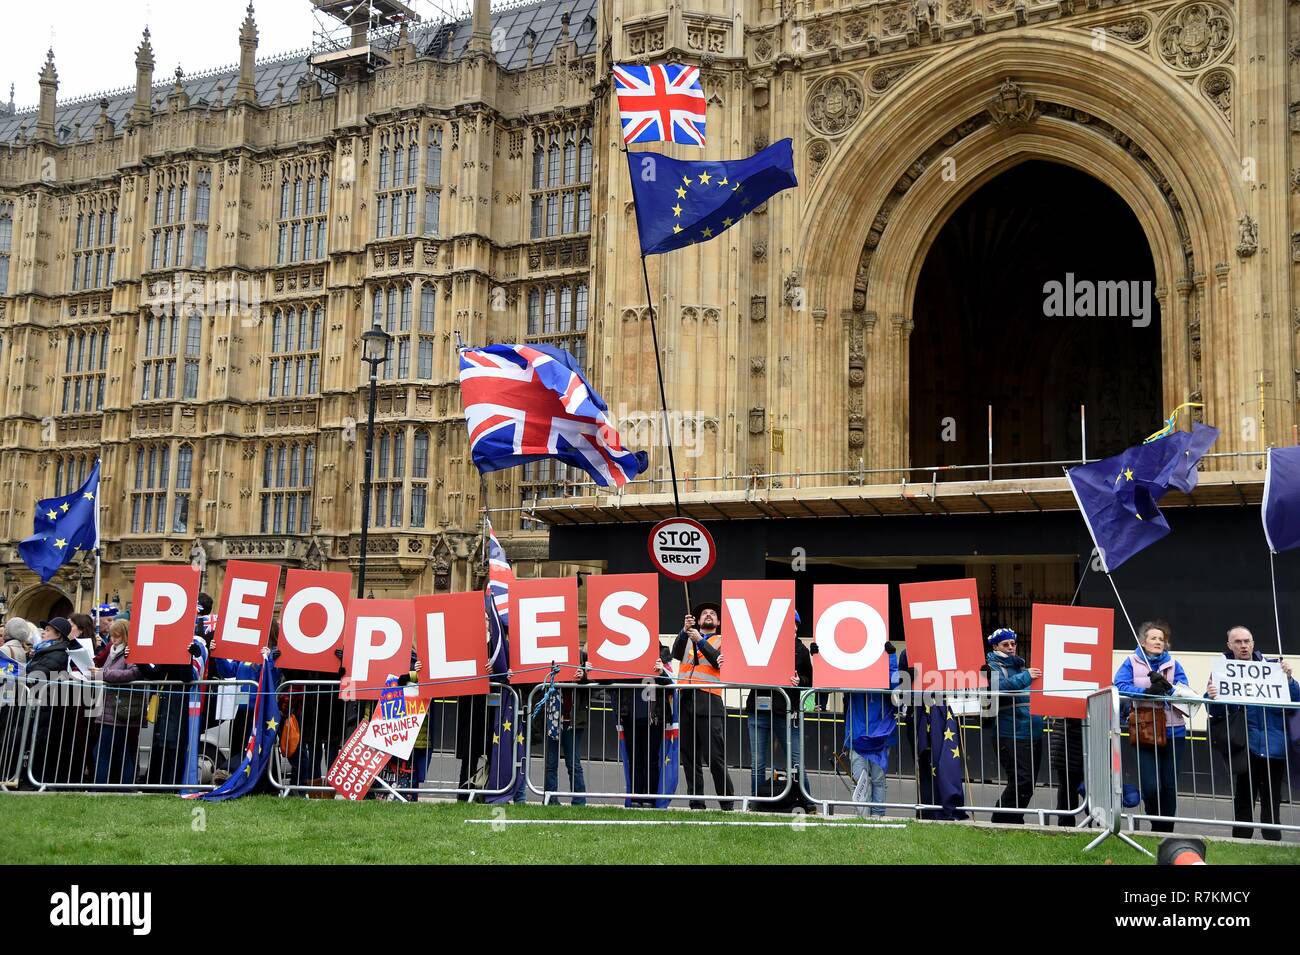 Anti-Brexit protesters calling for a People's Vote, Westminster, London Credit: Finnbarr Webster/Alamy Live News Stock Photo